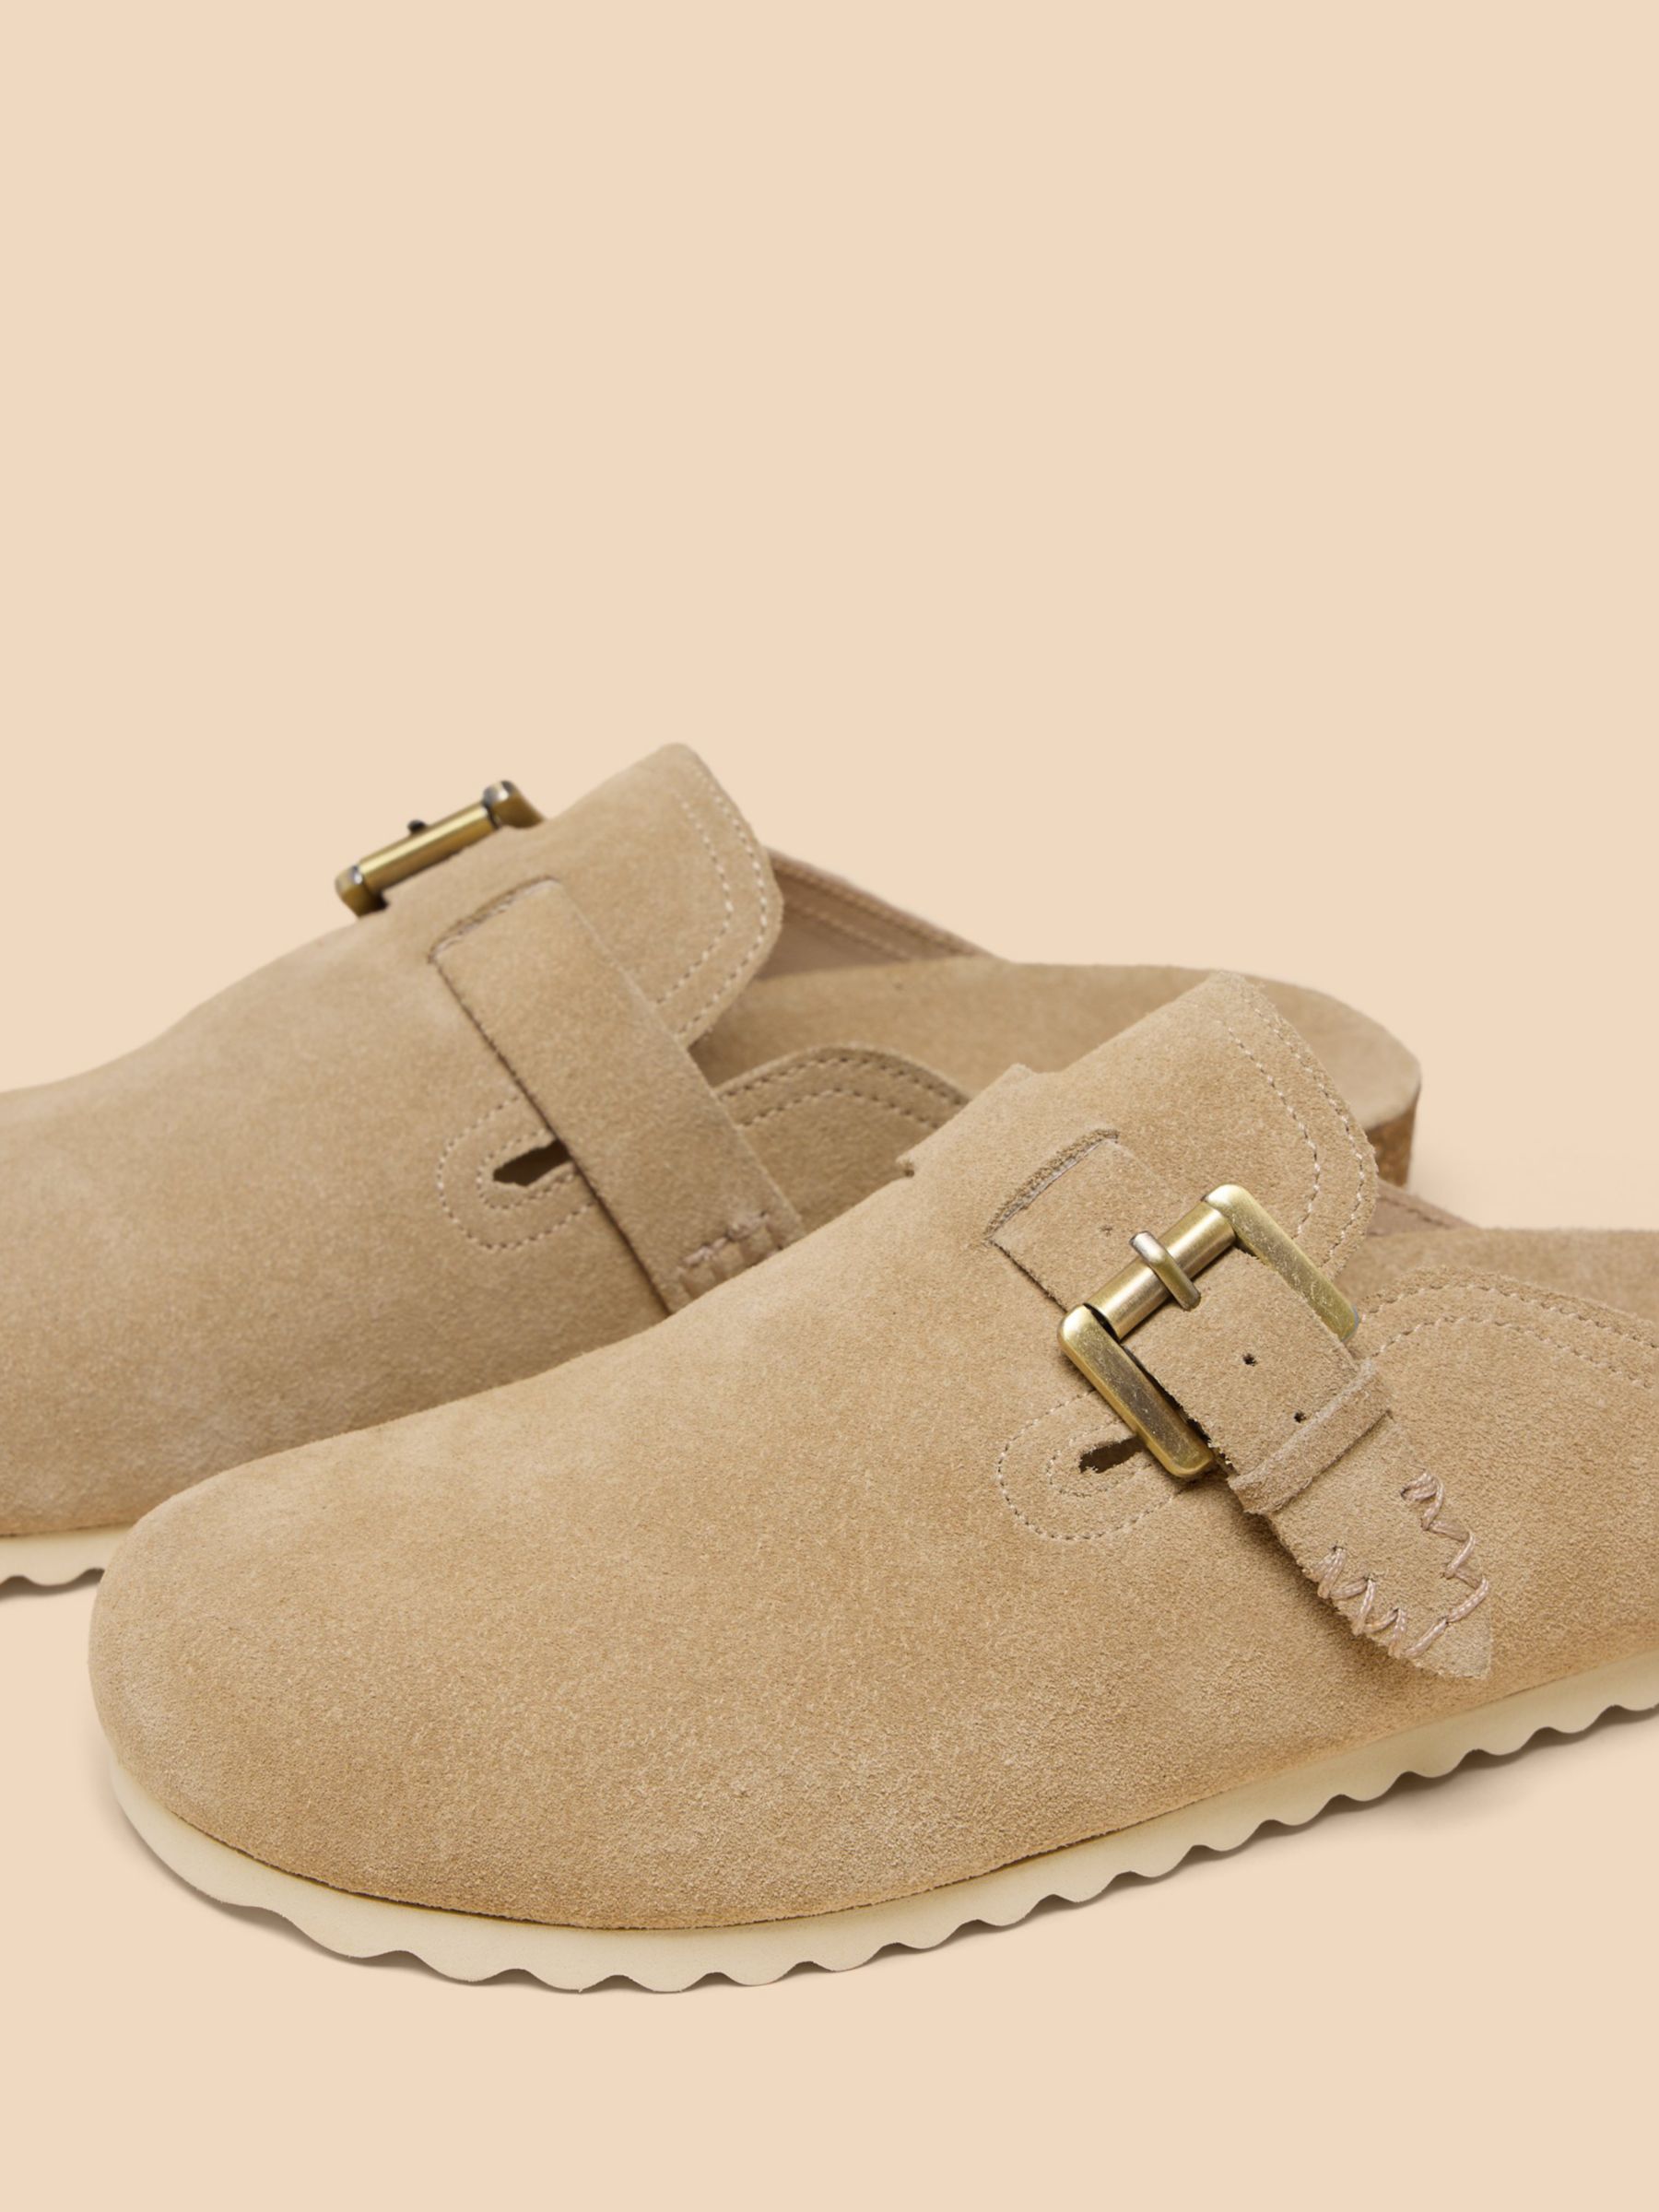 White Stuff Suede Slip On Mules, Natural, 3